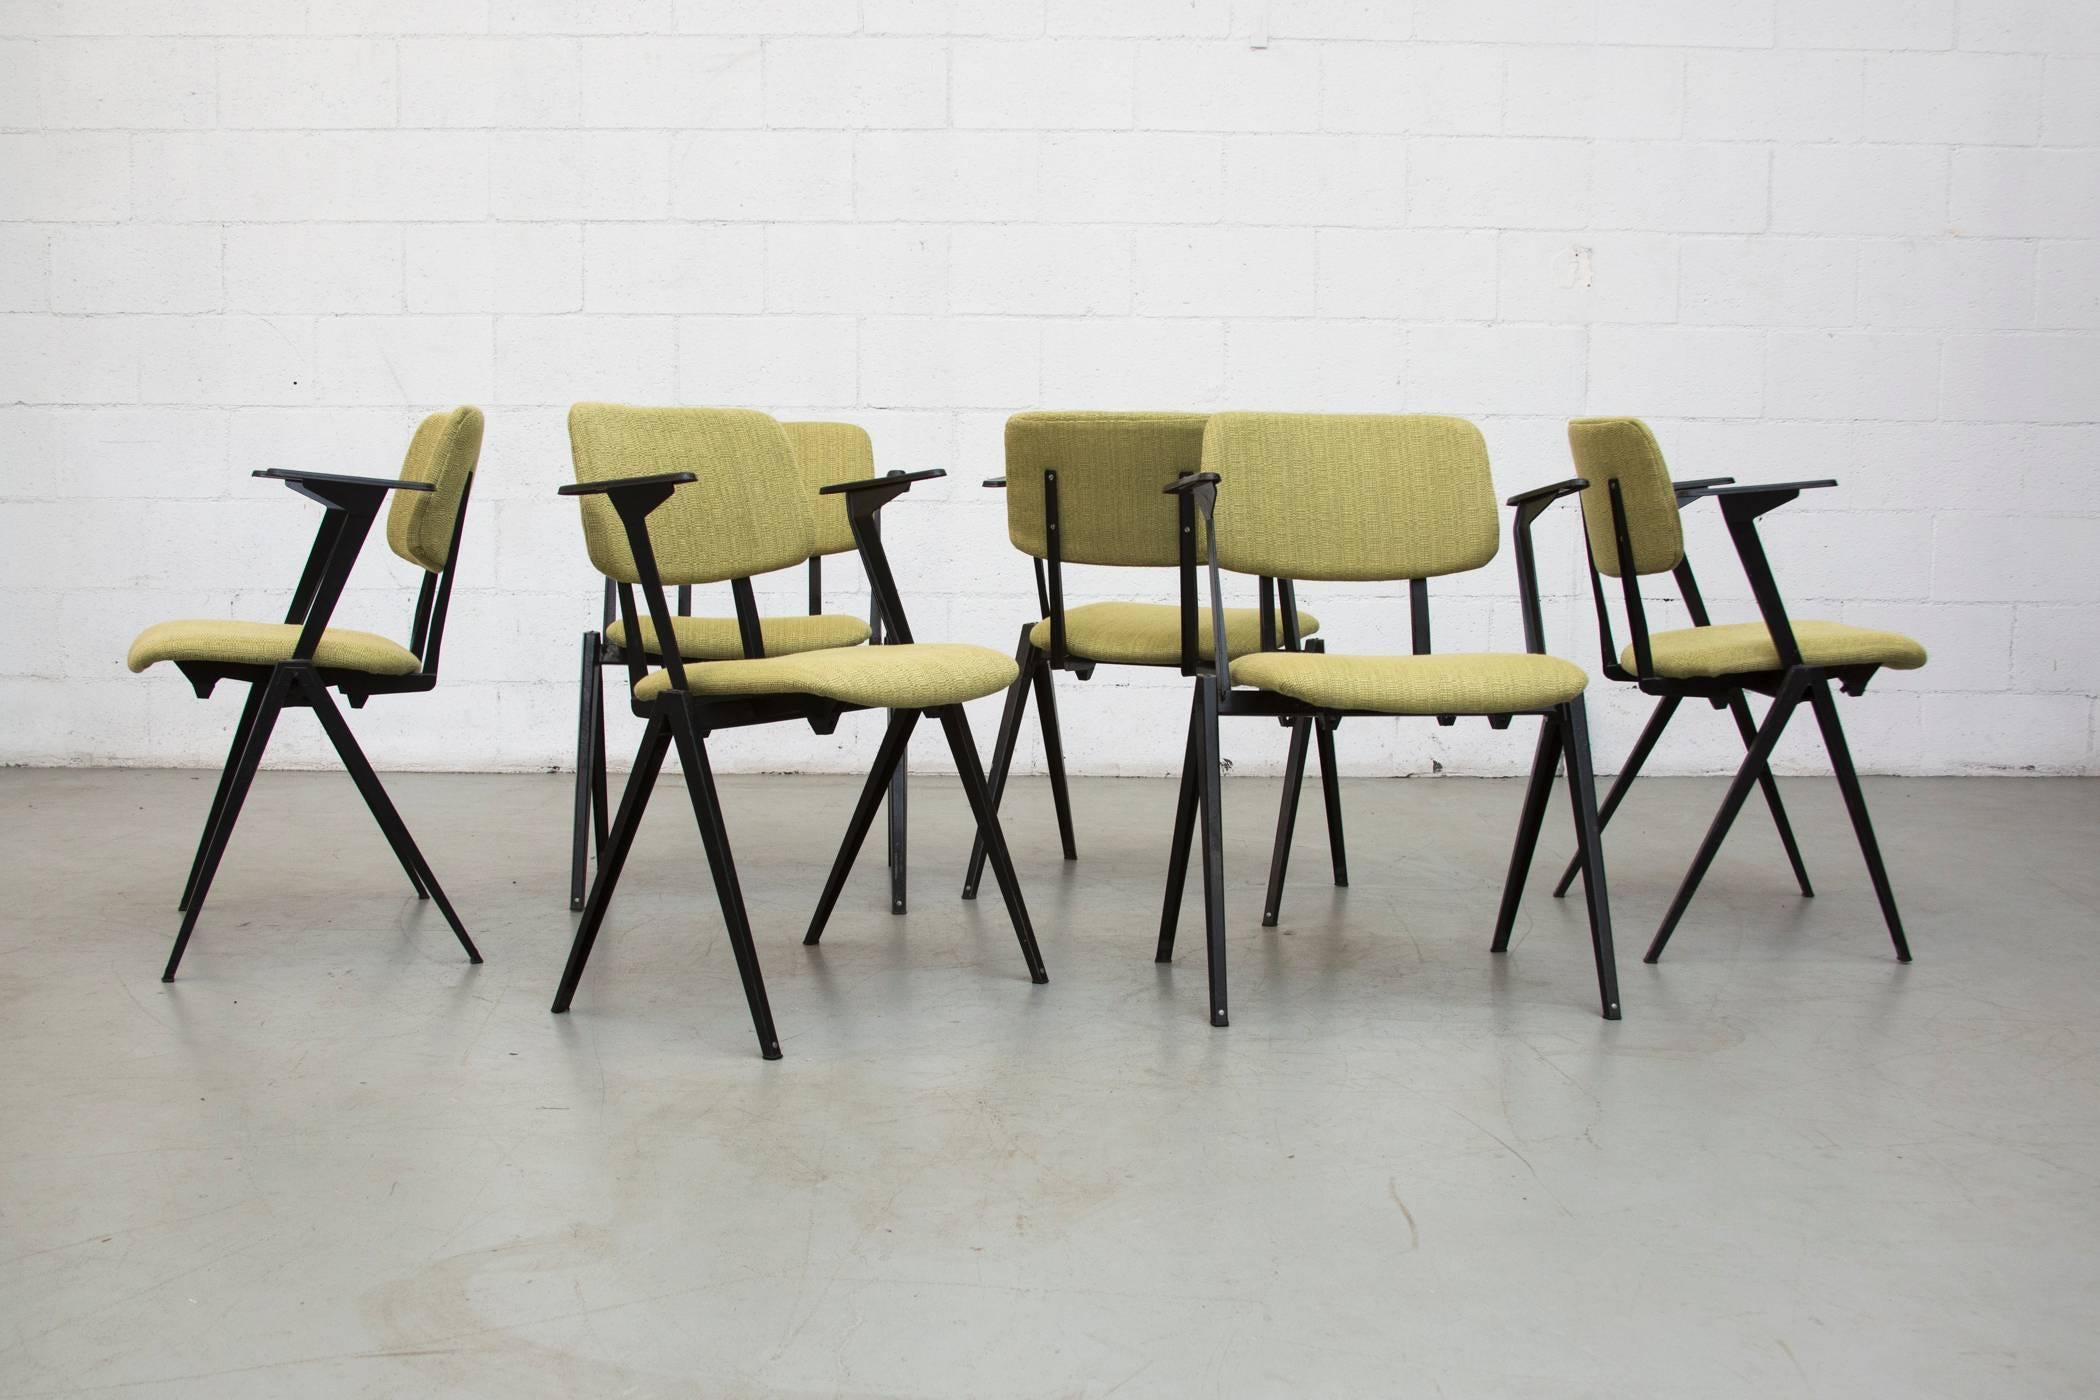 Set of six upholstered stacking chairs with folded sheet metal prouve style legs and new grass green upholstered seat and back. Frame in original condition. Stacks 4 high.